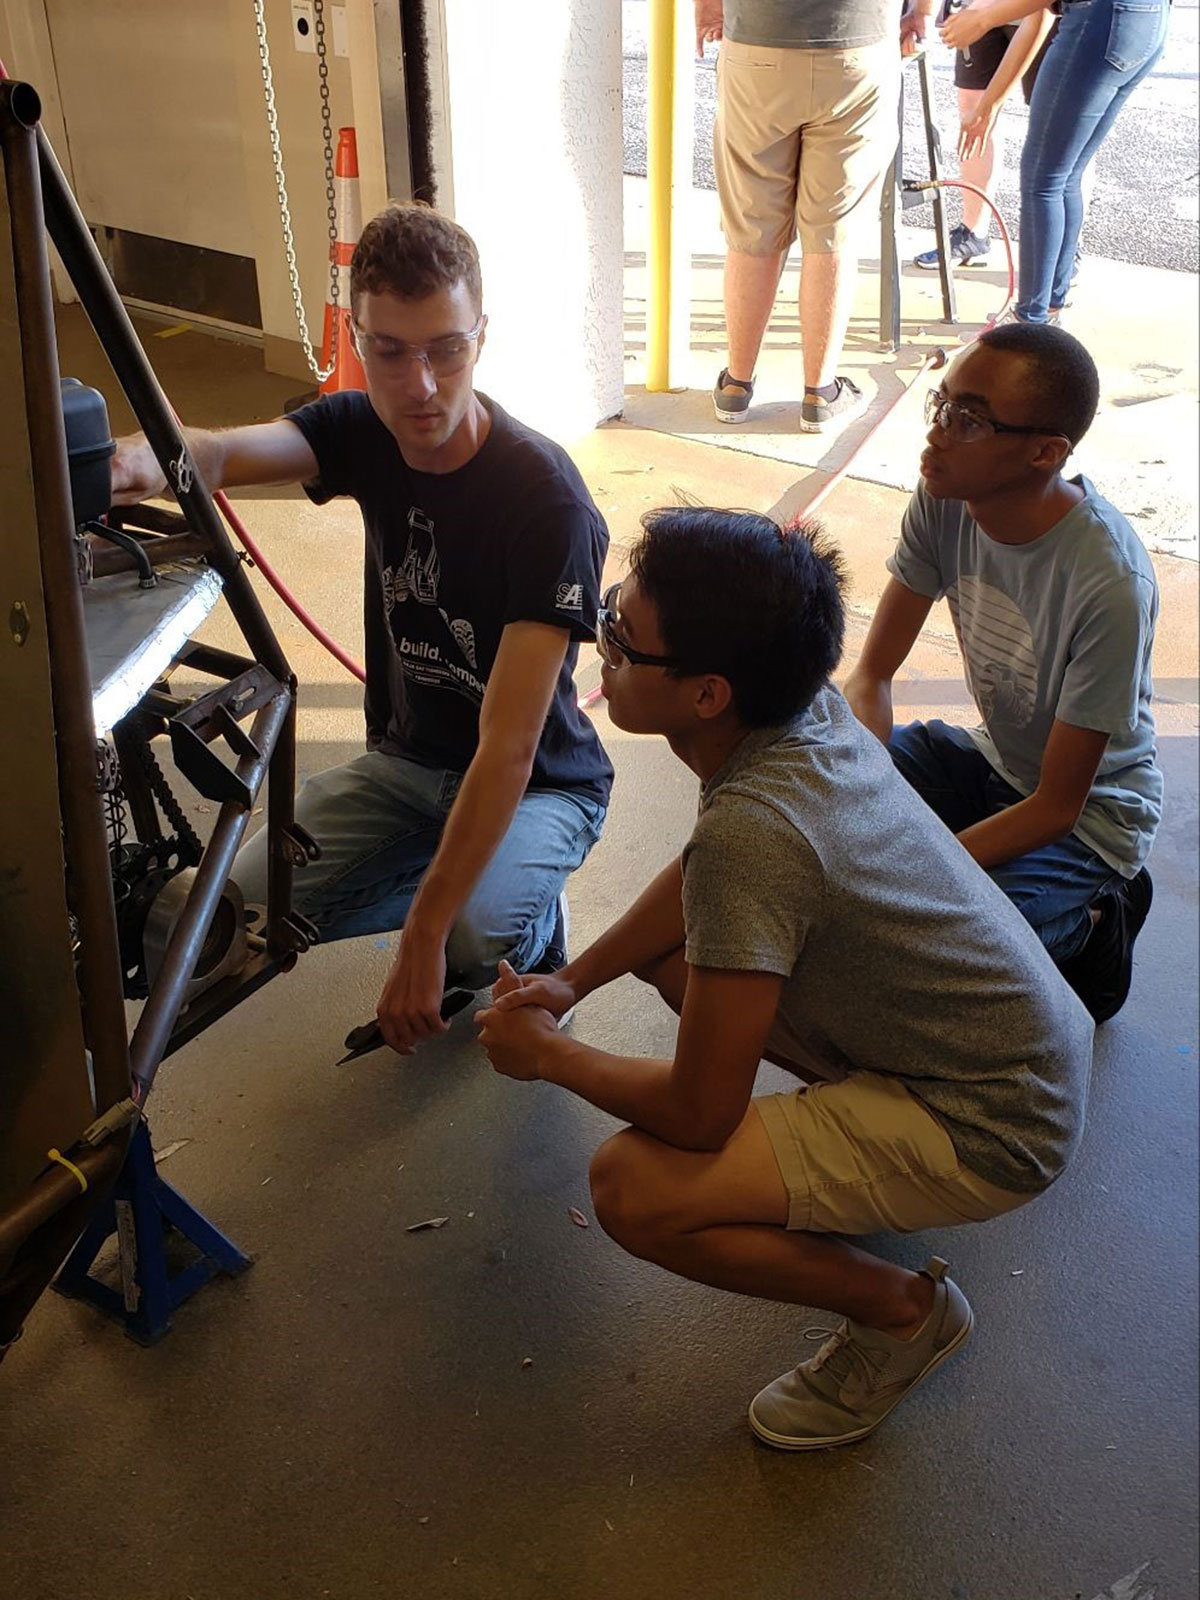 Student Justin McAuliffe explains the powertrain and drivetrain components to new team members